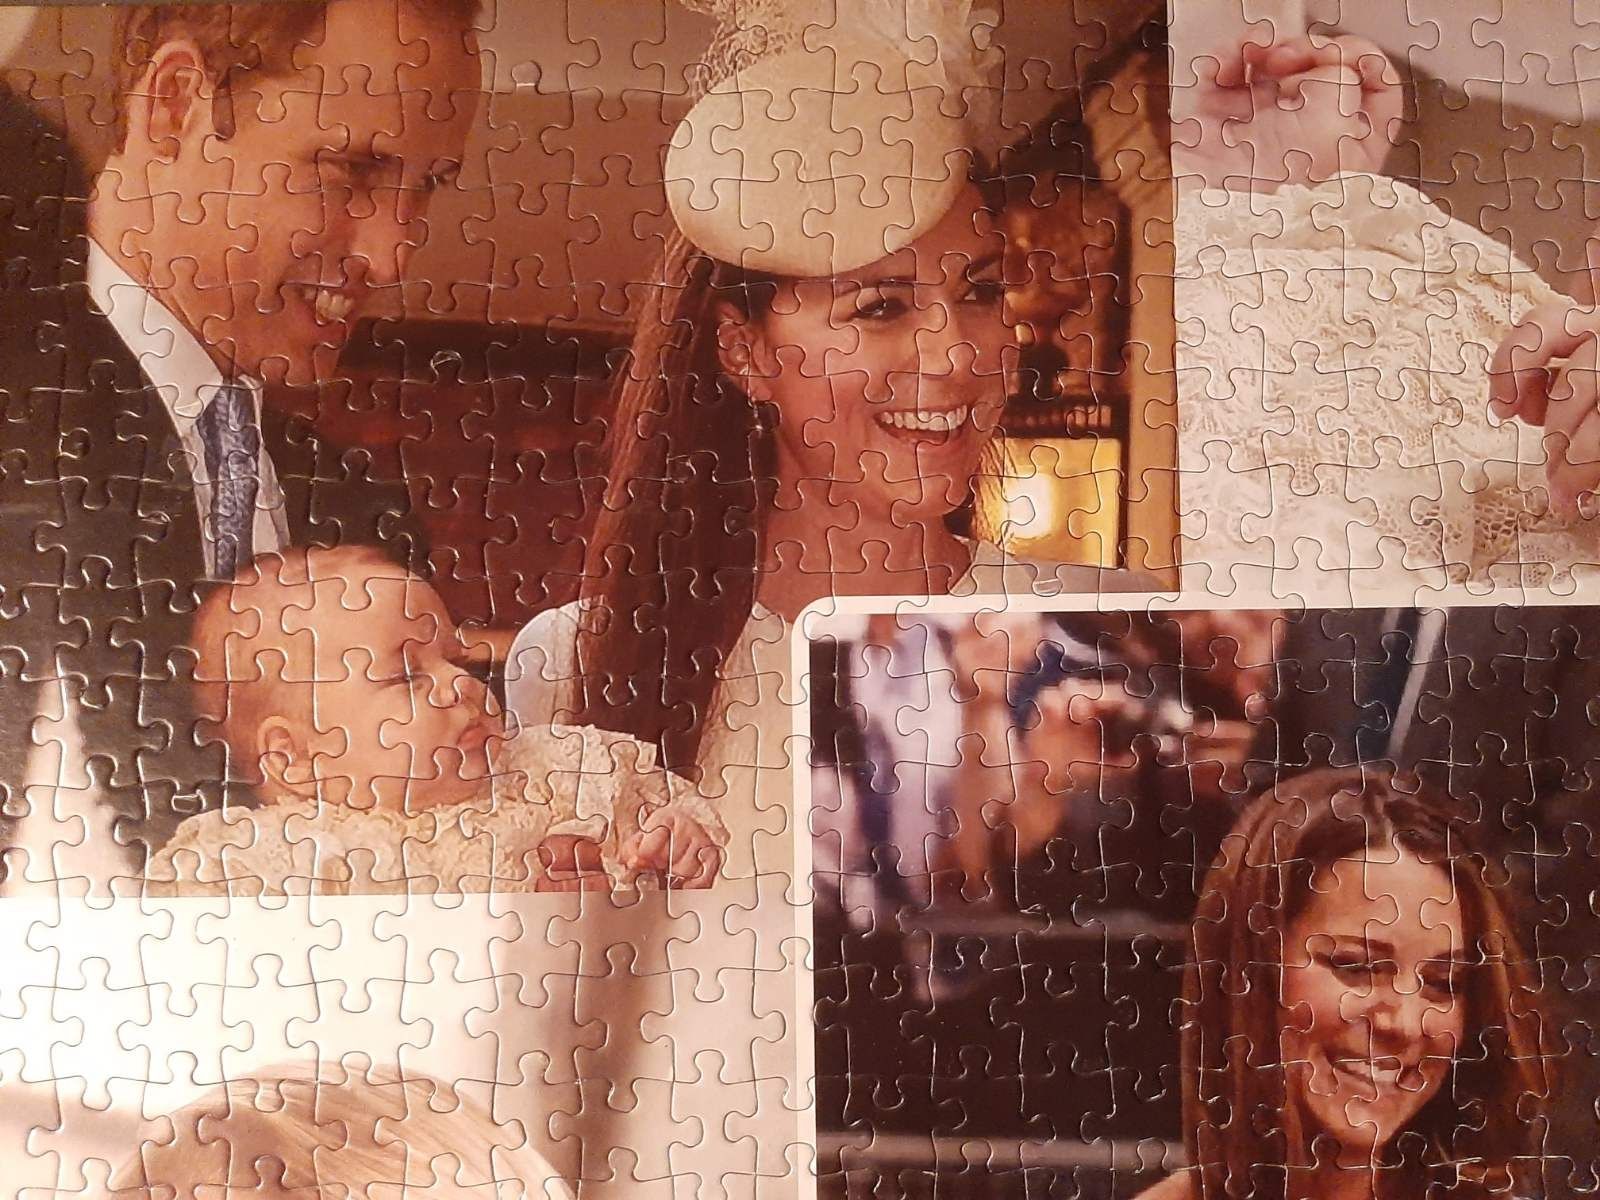 Puzzle dla fanów Royal Family - Royal Babies - 1000 (-2)  Daily Mail